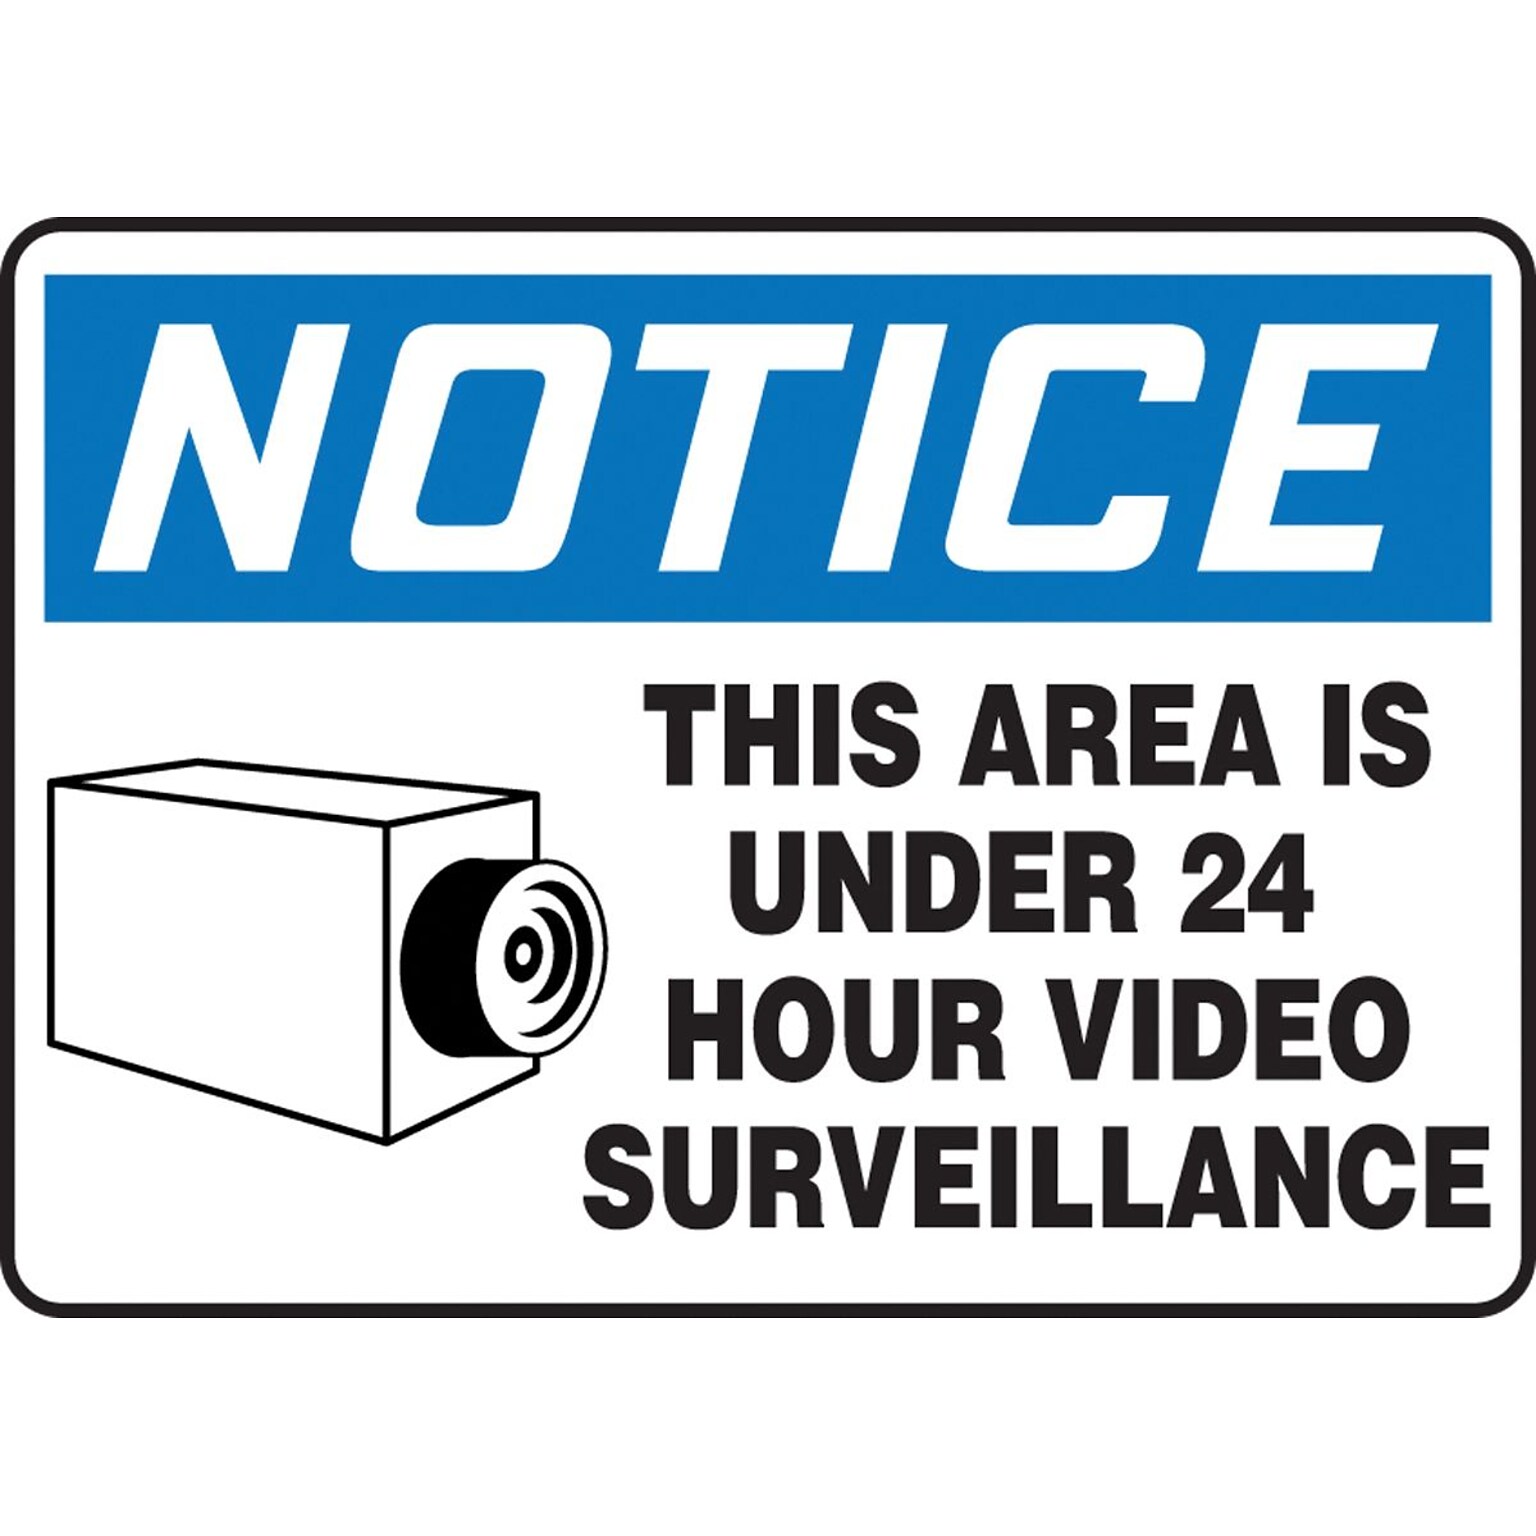 Accuform 7 x 10 Aluminum Safety Sign NOTICE THIS AREA IS..W/GRAPHIC, Blue/Black On White (MASE806VA)